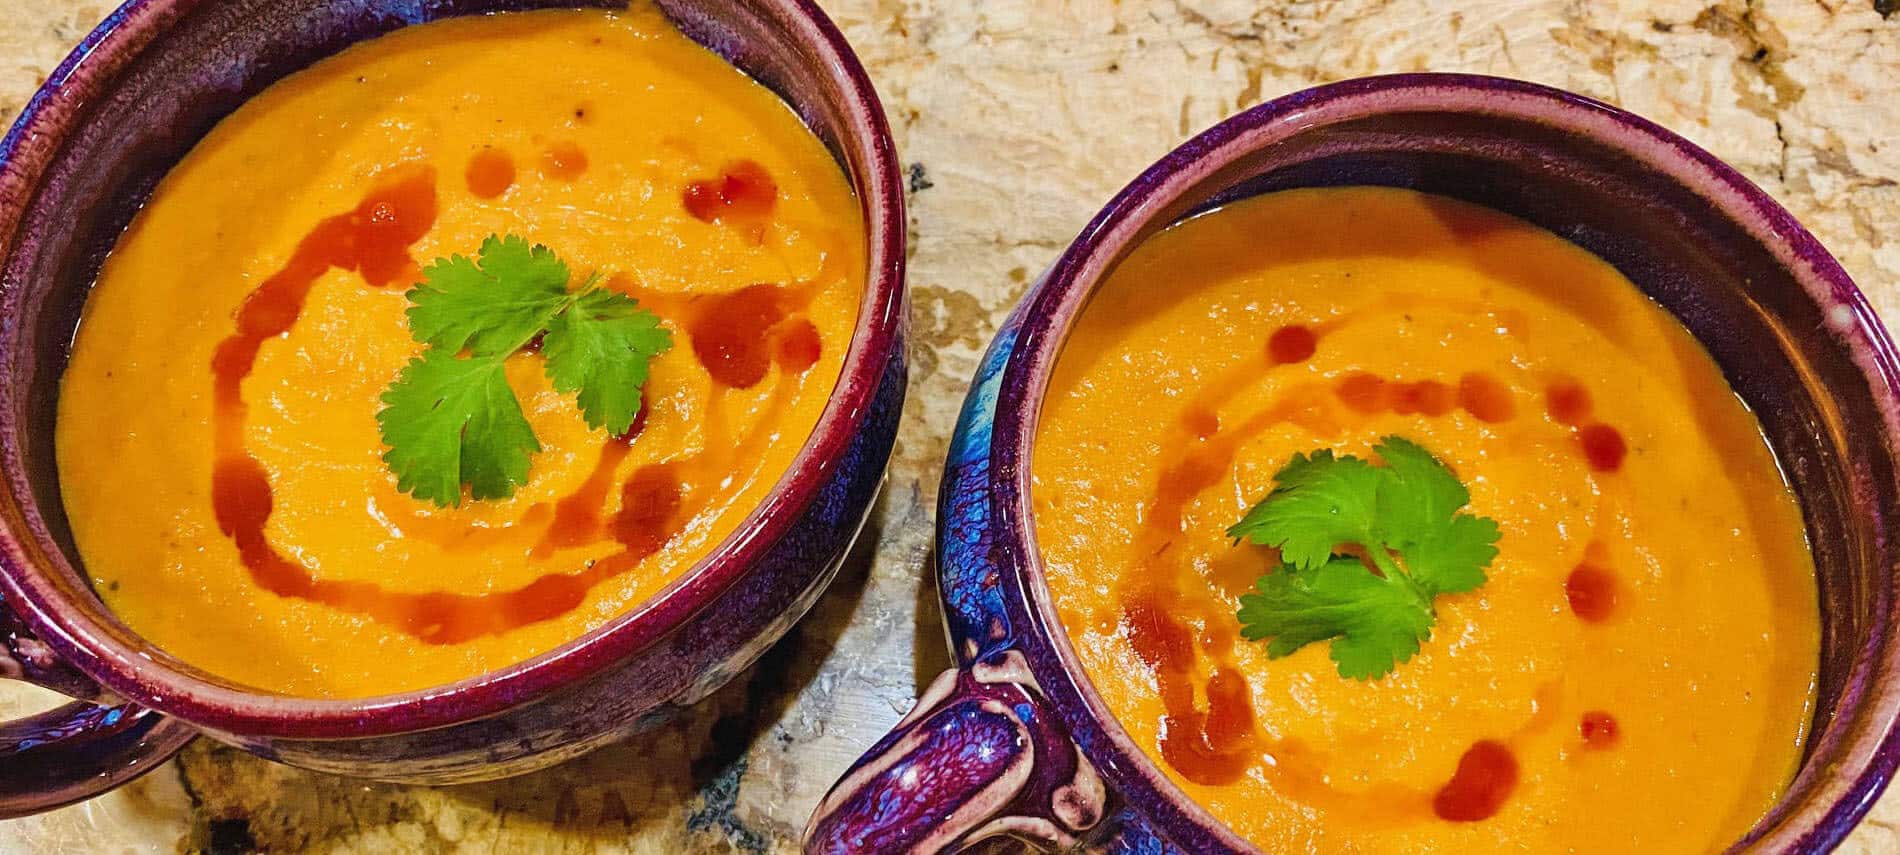 Orange Carrot-Coconut Soup drizzed with a red Thai sauce and garnished with green cilantro leaves in purple soup bowls